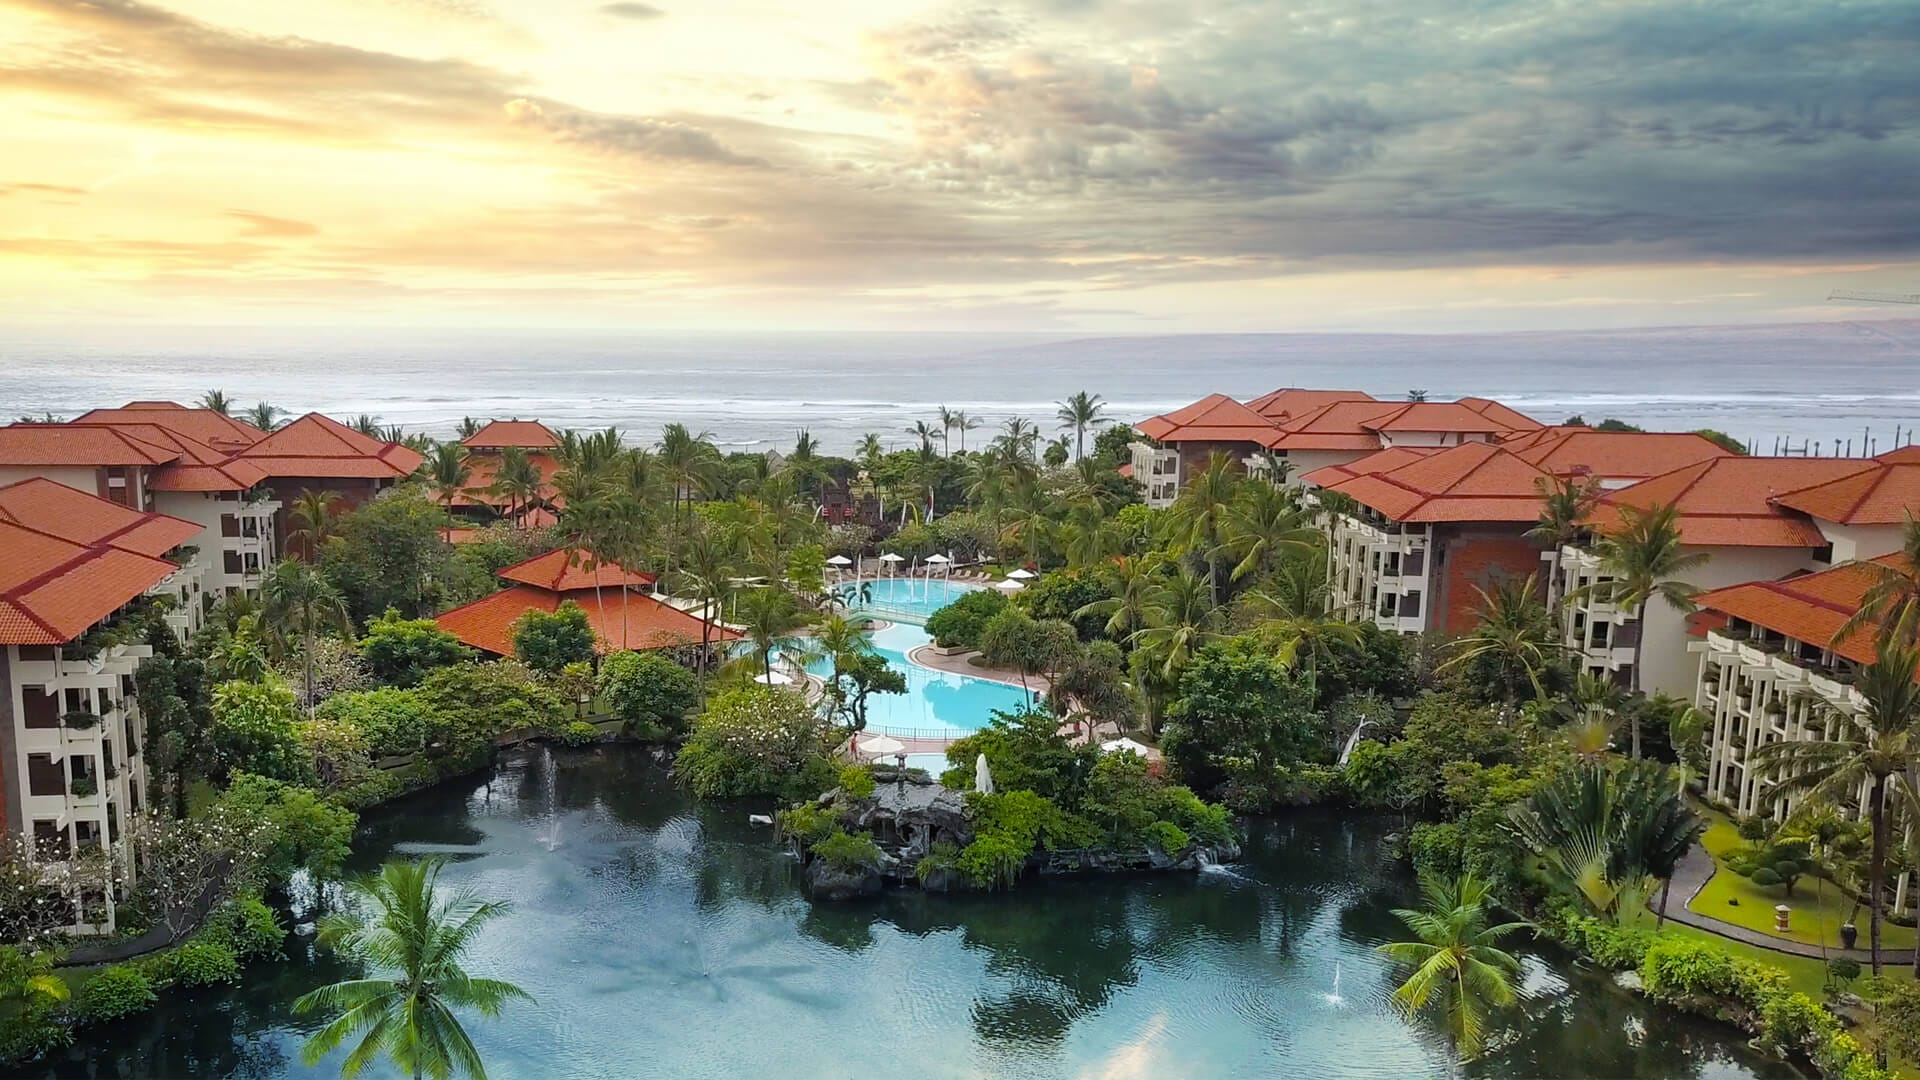 17 Luxurious Hotels to Stay in Nusa Dua